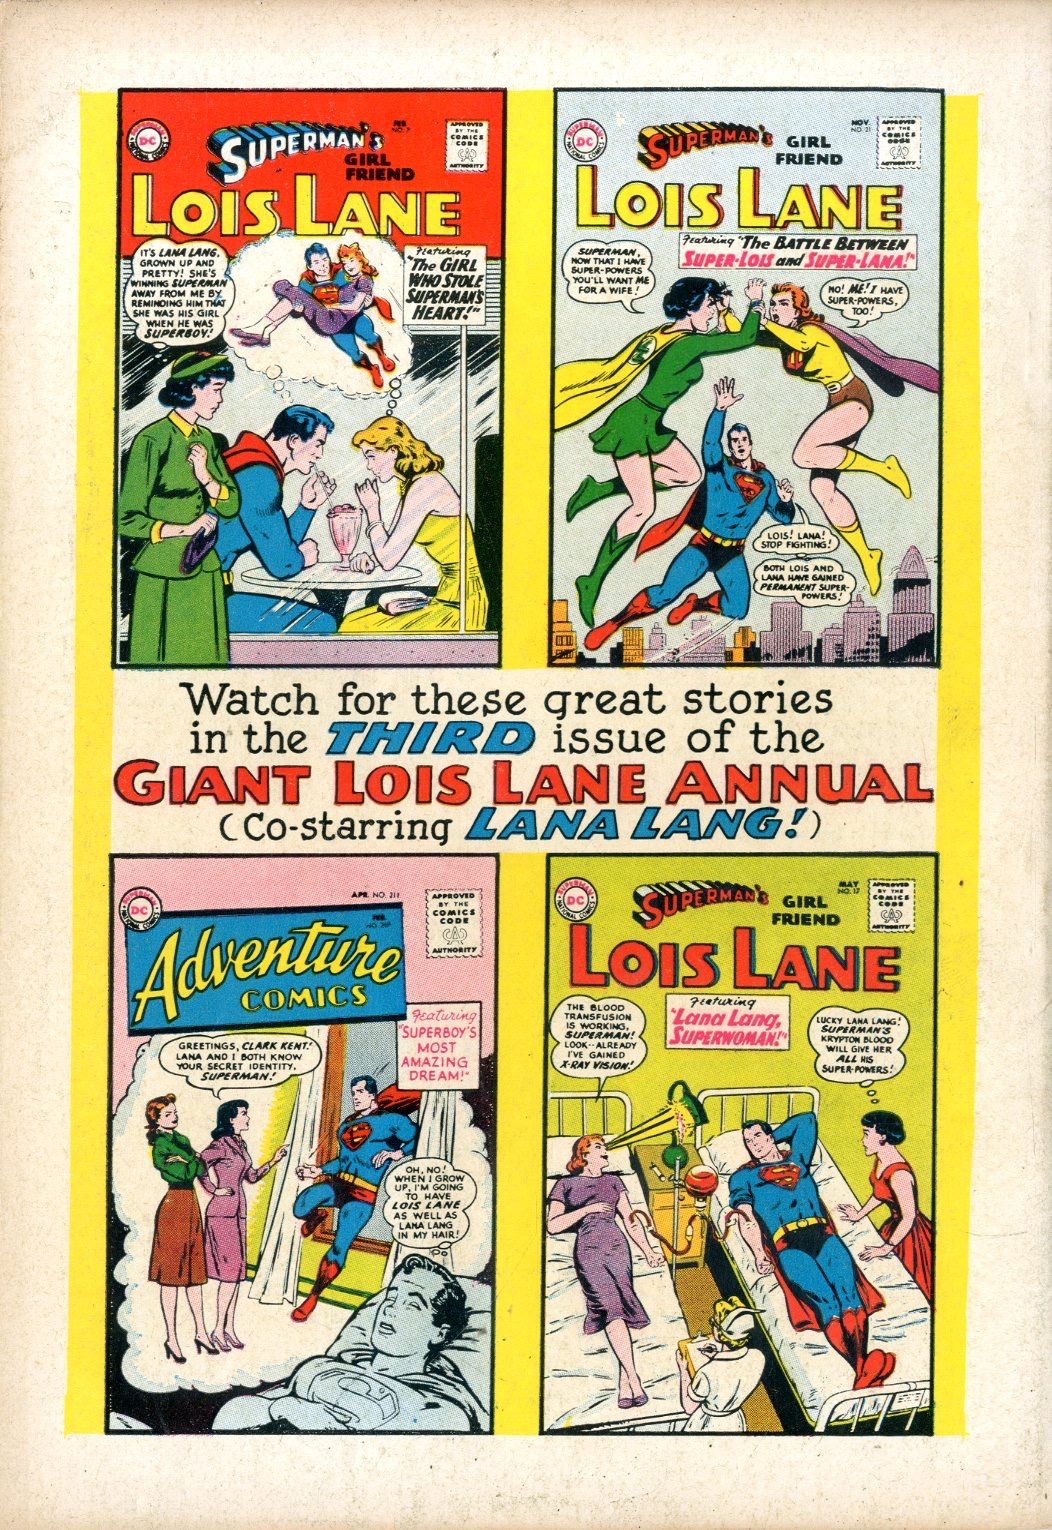 80 Page Giant   Annual - 11409